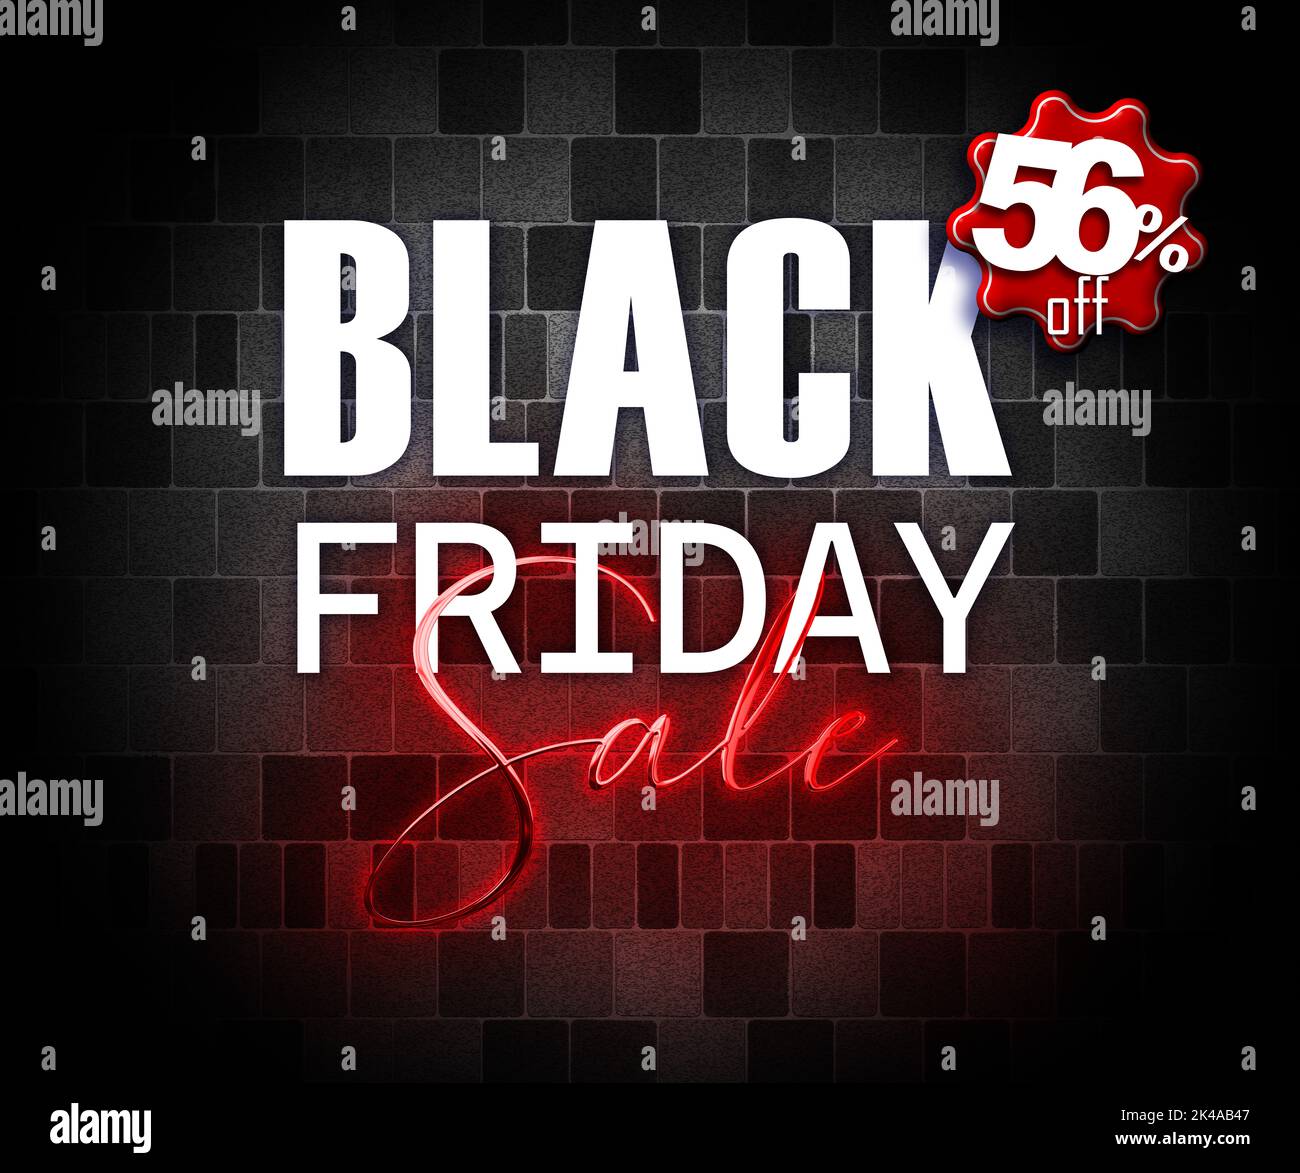 illustration with 3d elements black friday promotion banner 56 percent off sales increase Stock Photo